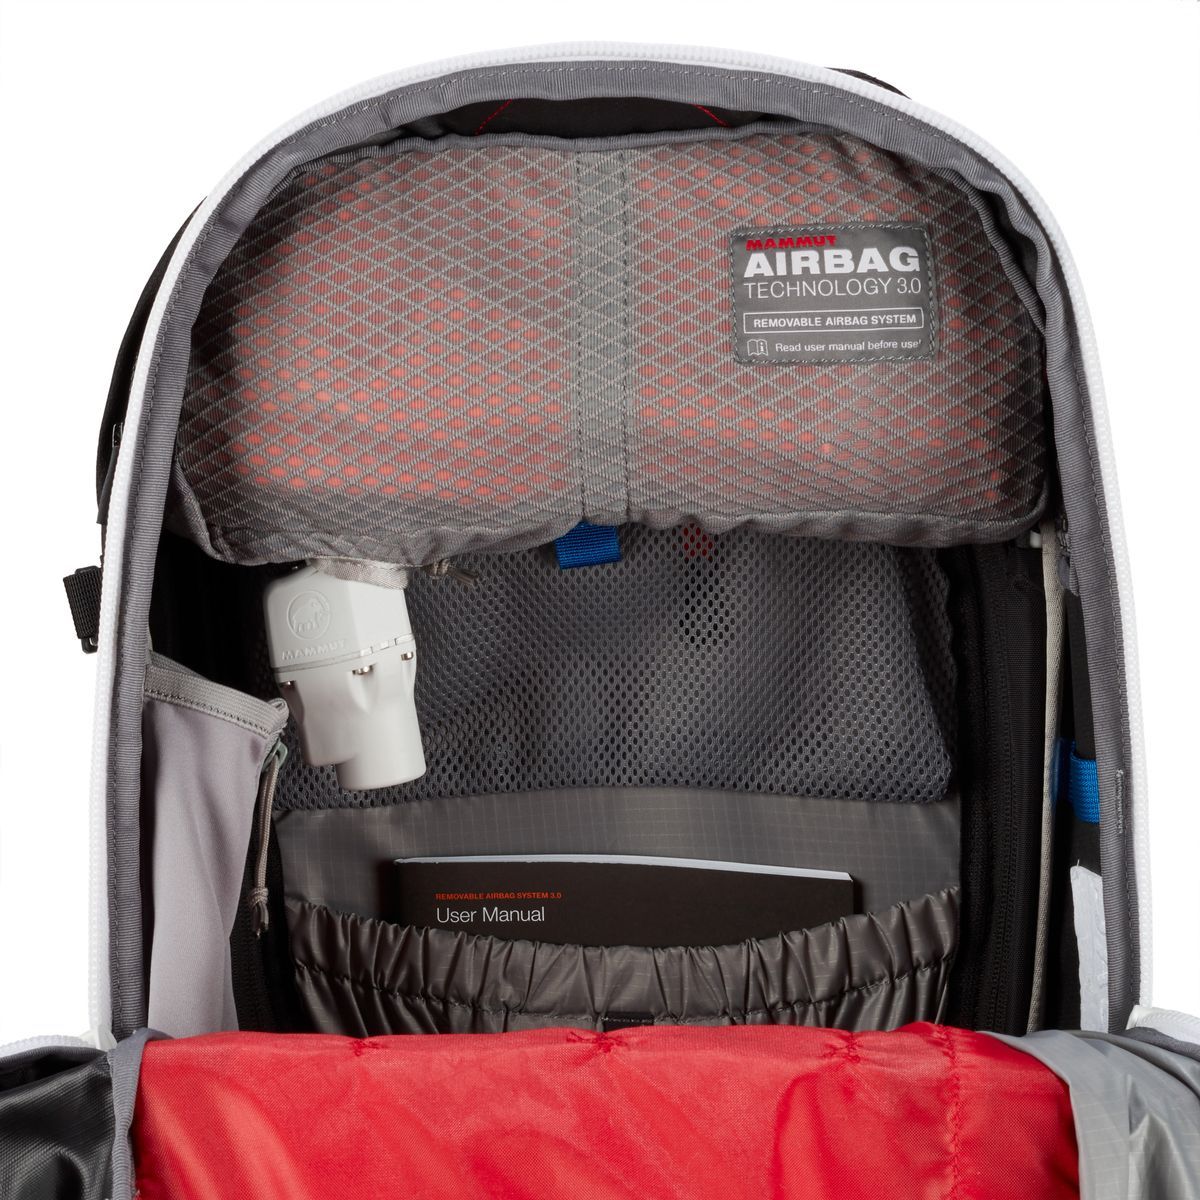 Sac à dos Airbag Pro Removable Airbag 3.0